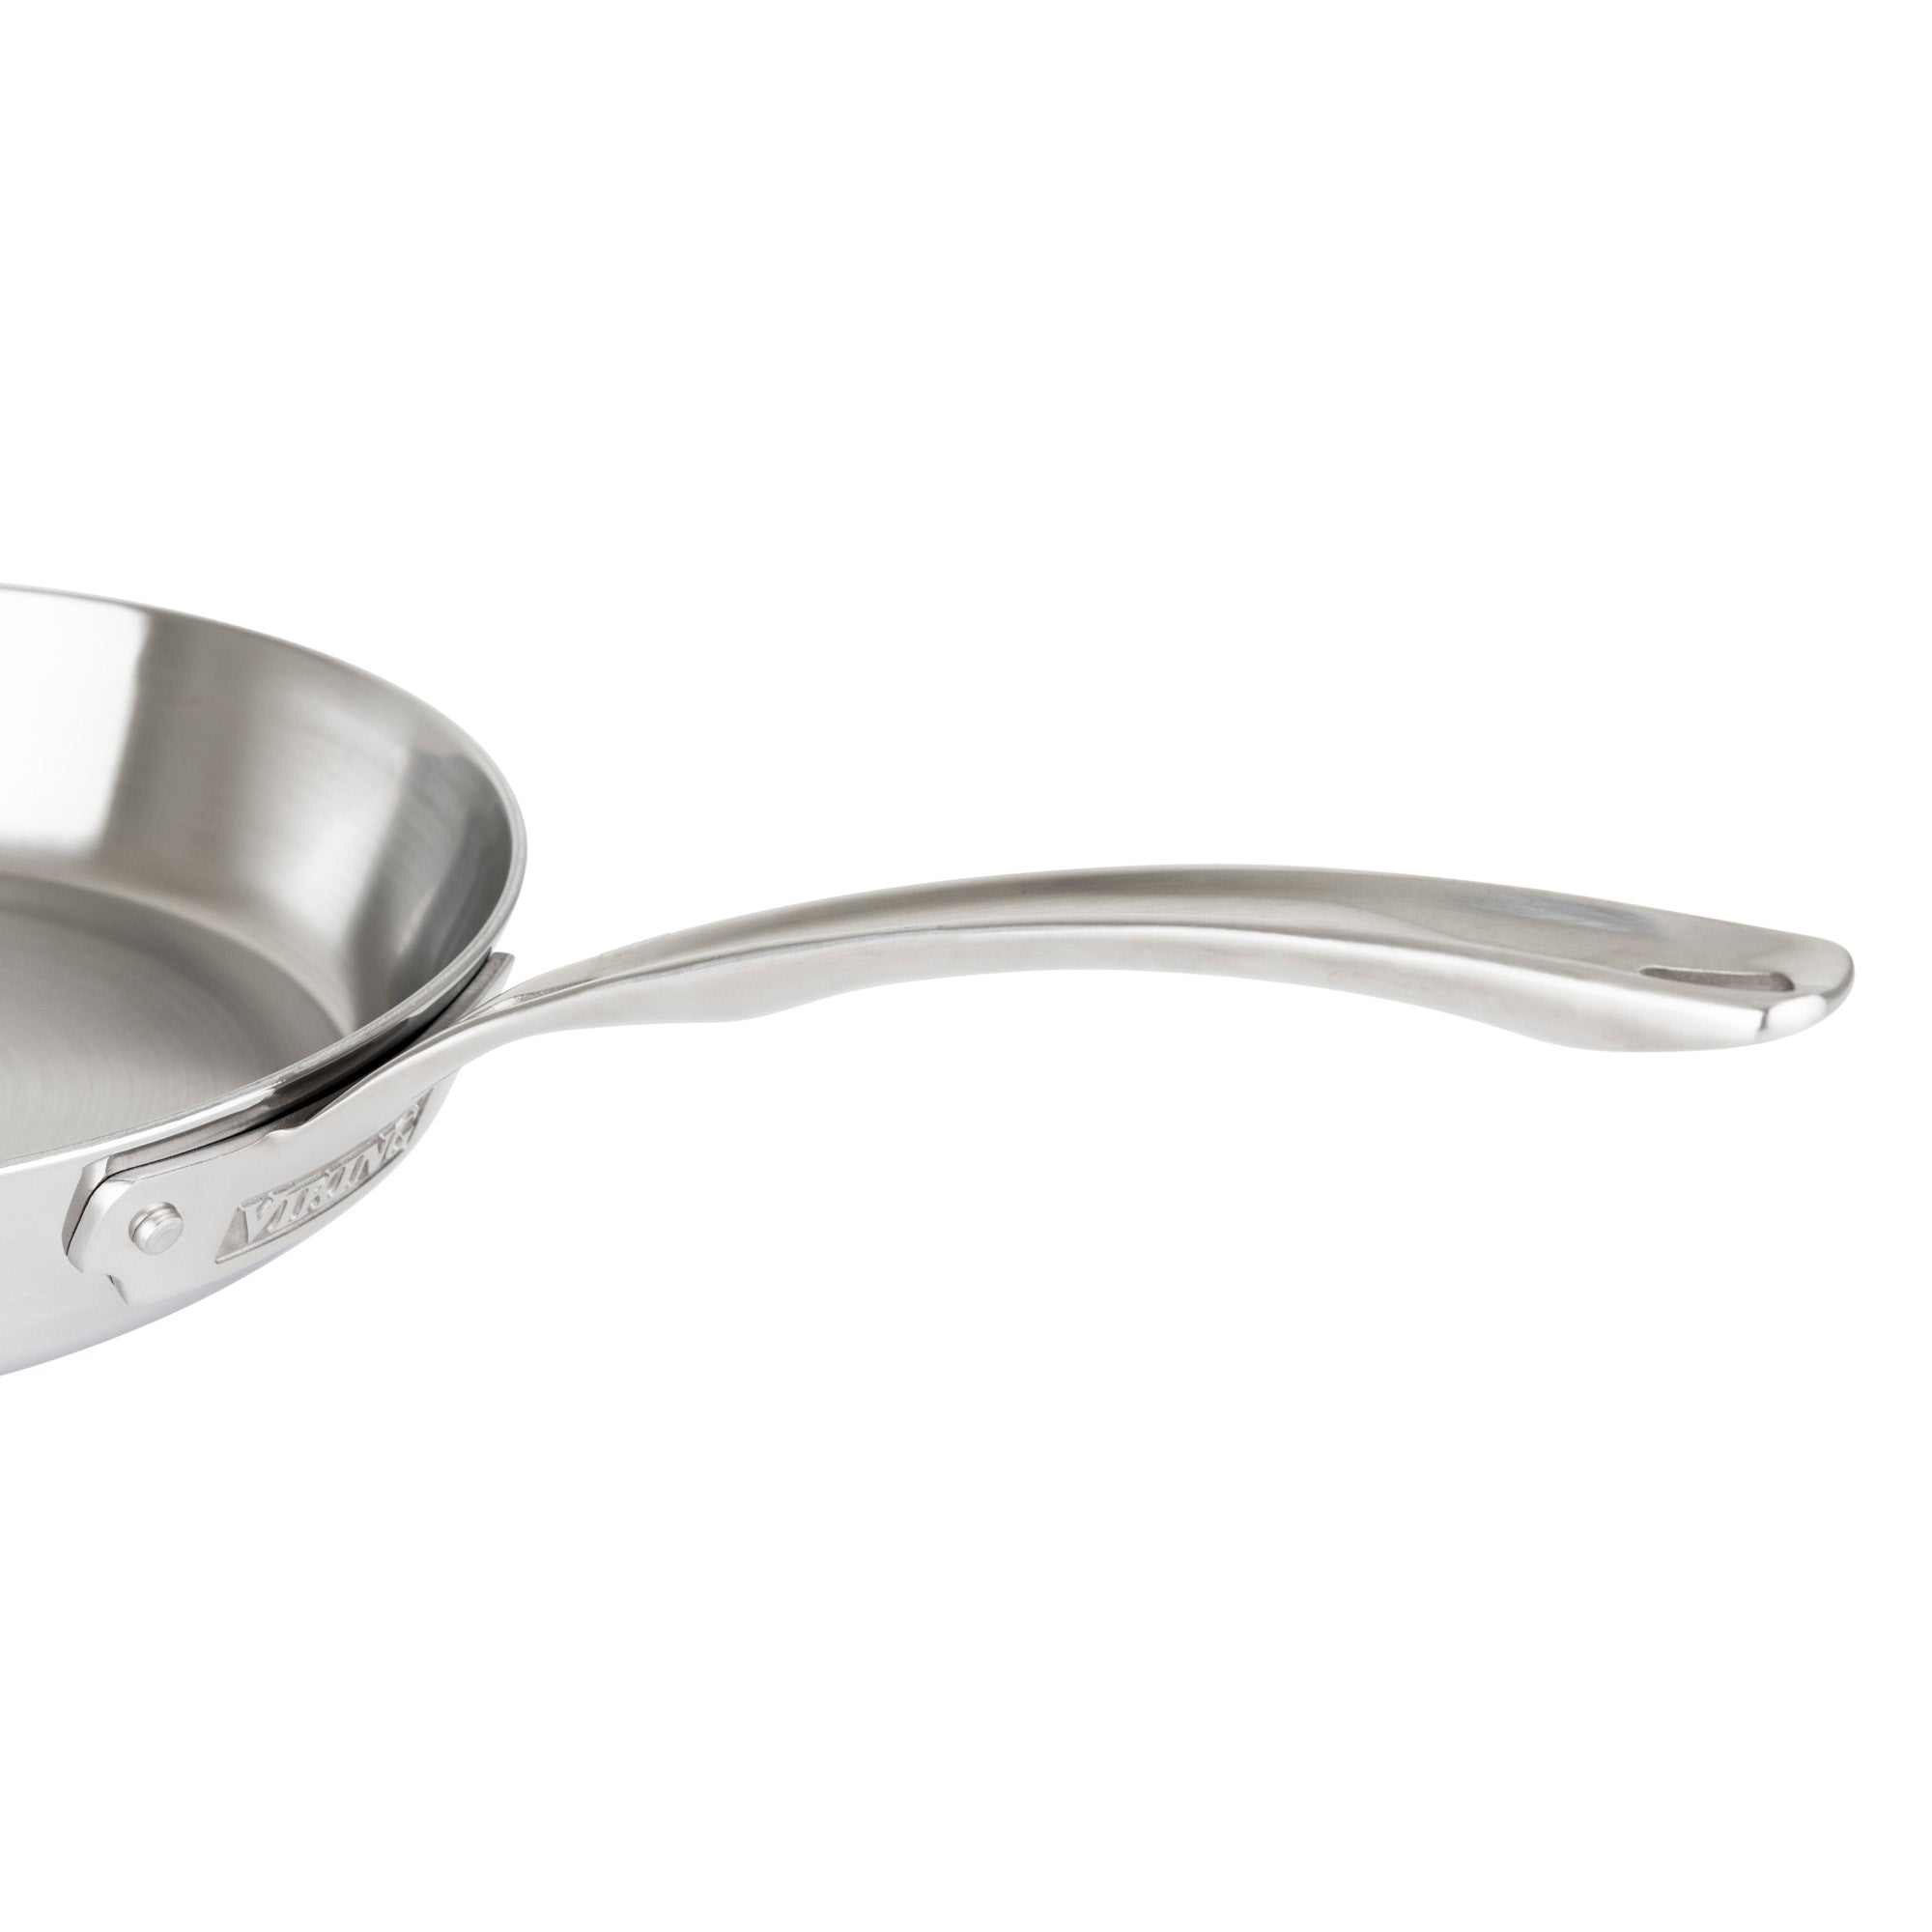 Viking Contemporary 3-Ply Stainless Steel 10-Inch Fry Pan